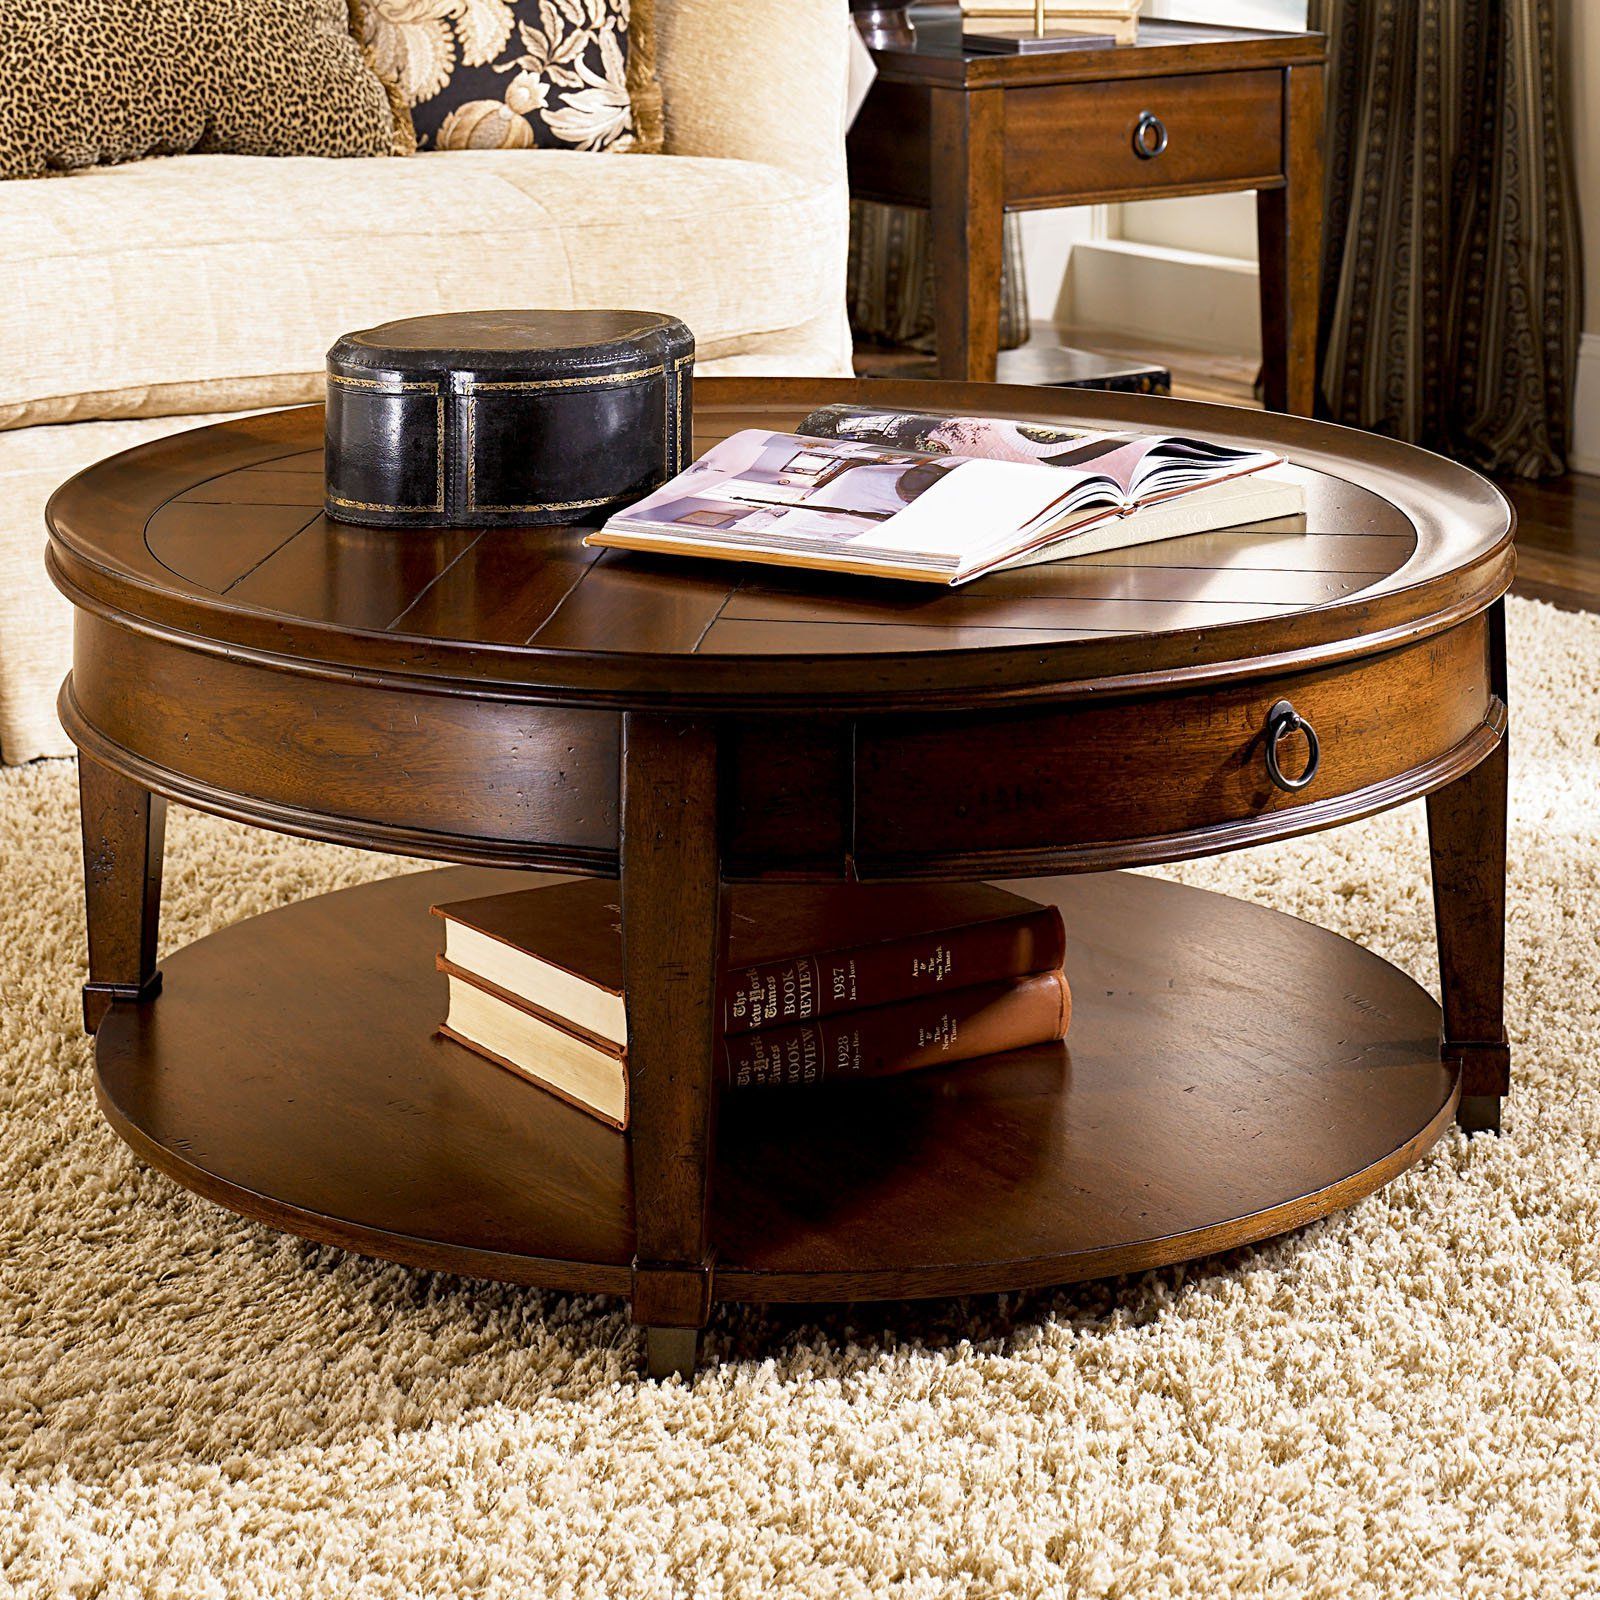 Hammary Sunset Valley Round Cocktail Table – Rich Mahogany | Mahogany Inside Round Coffee Tables With Storage (Gallery 15 of 20)